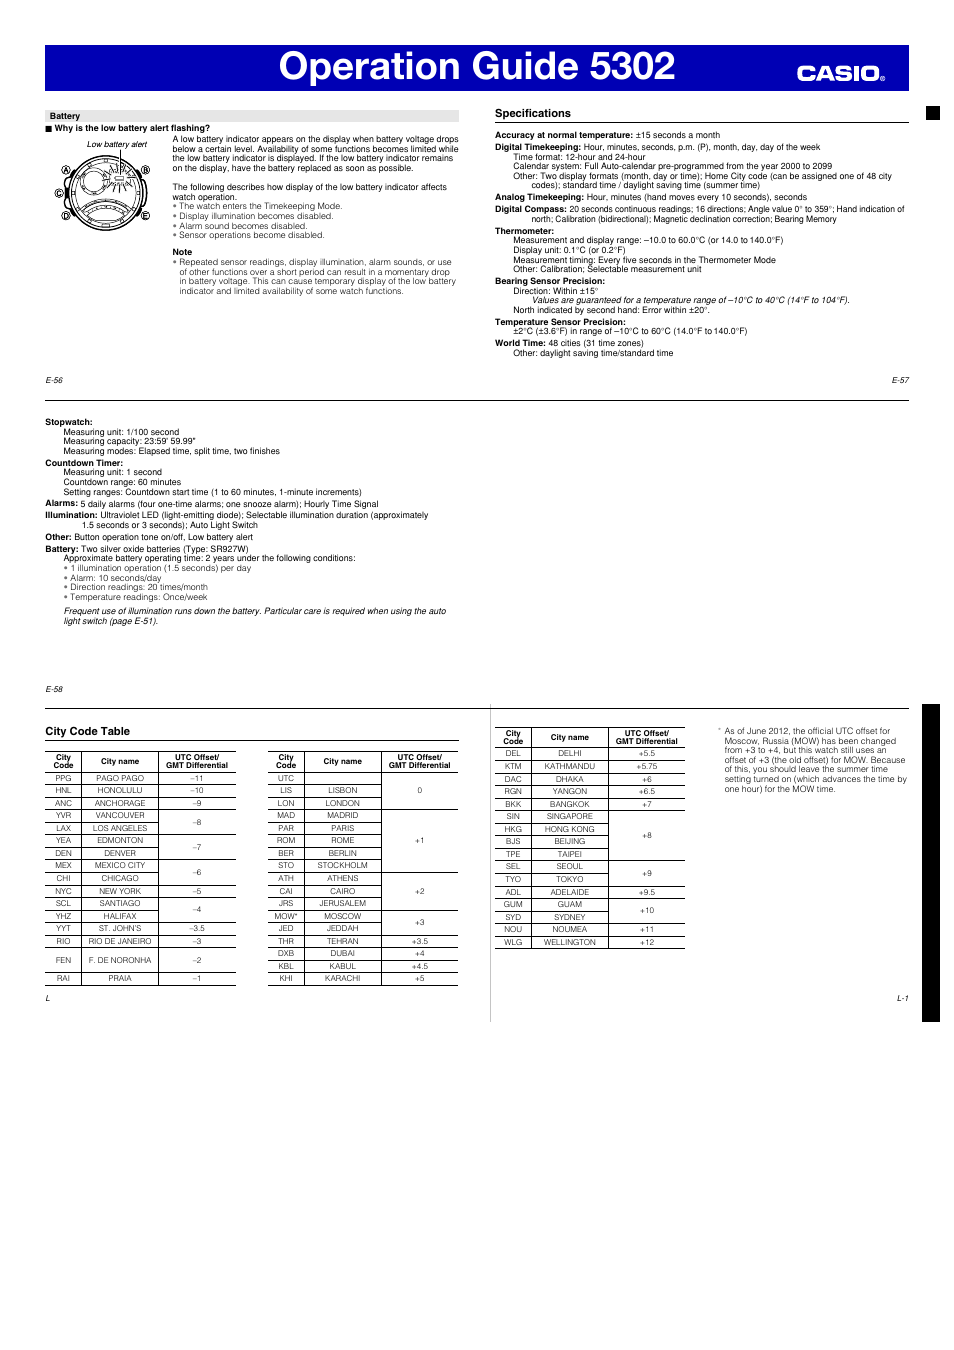 Operation guide 5302 | G-Shock GA-1000 User Manual | Page 8 / 8